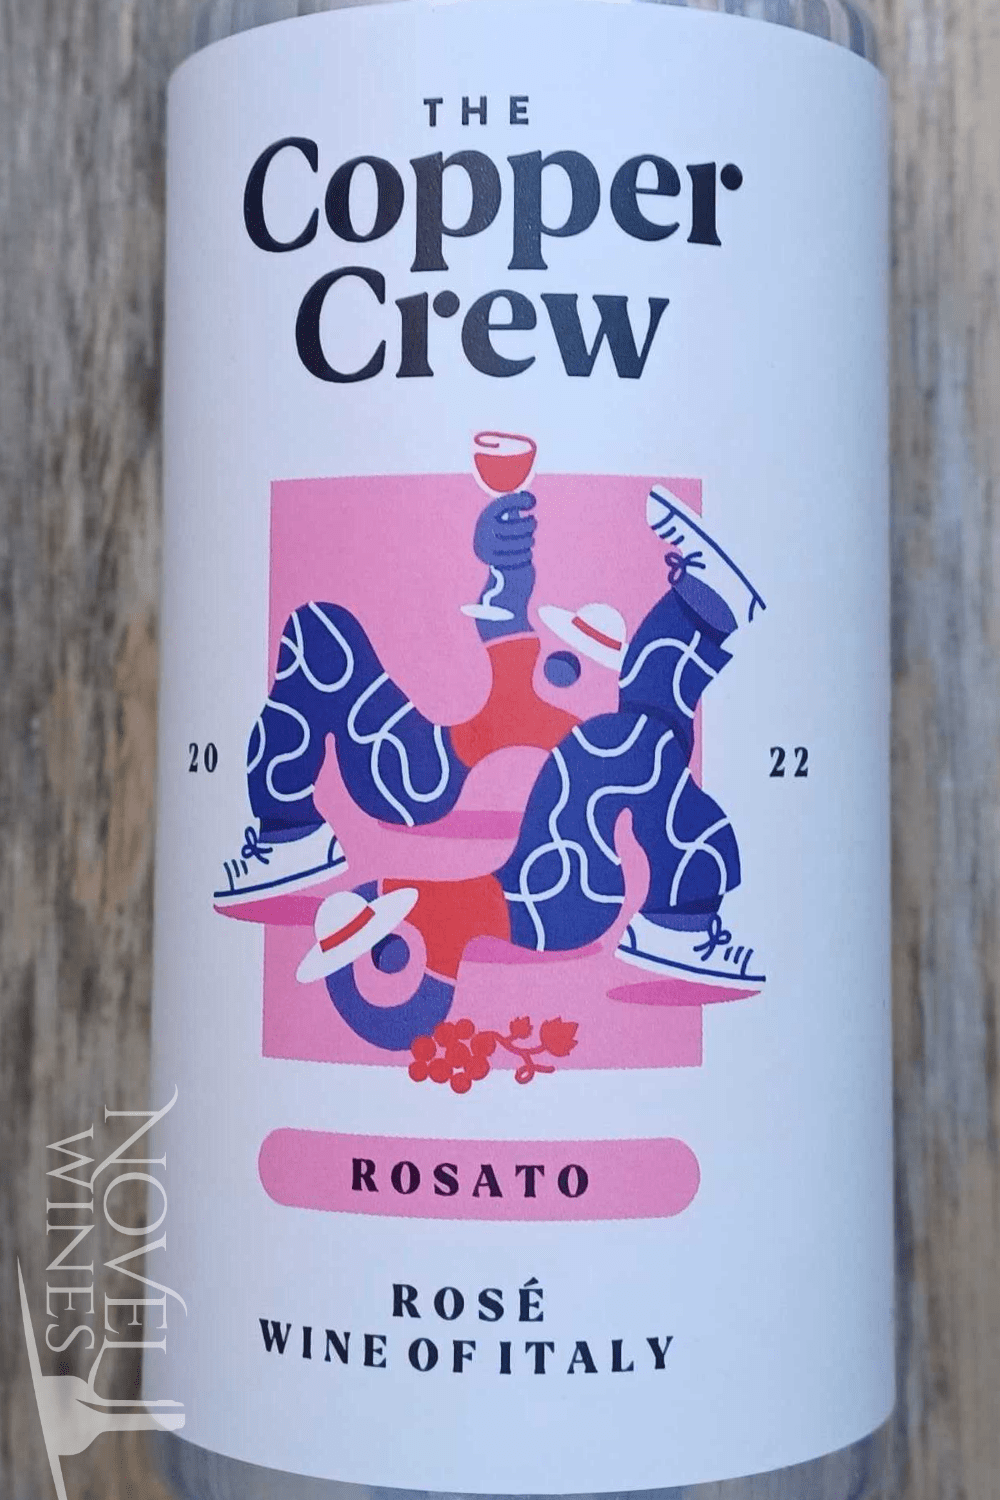 Novel Wines Canned Wine Co. The Copper Crew Rosato Organic, Italy